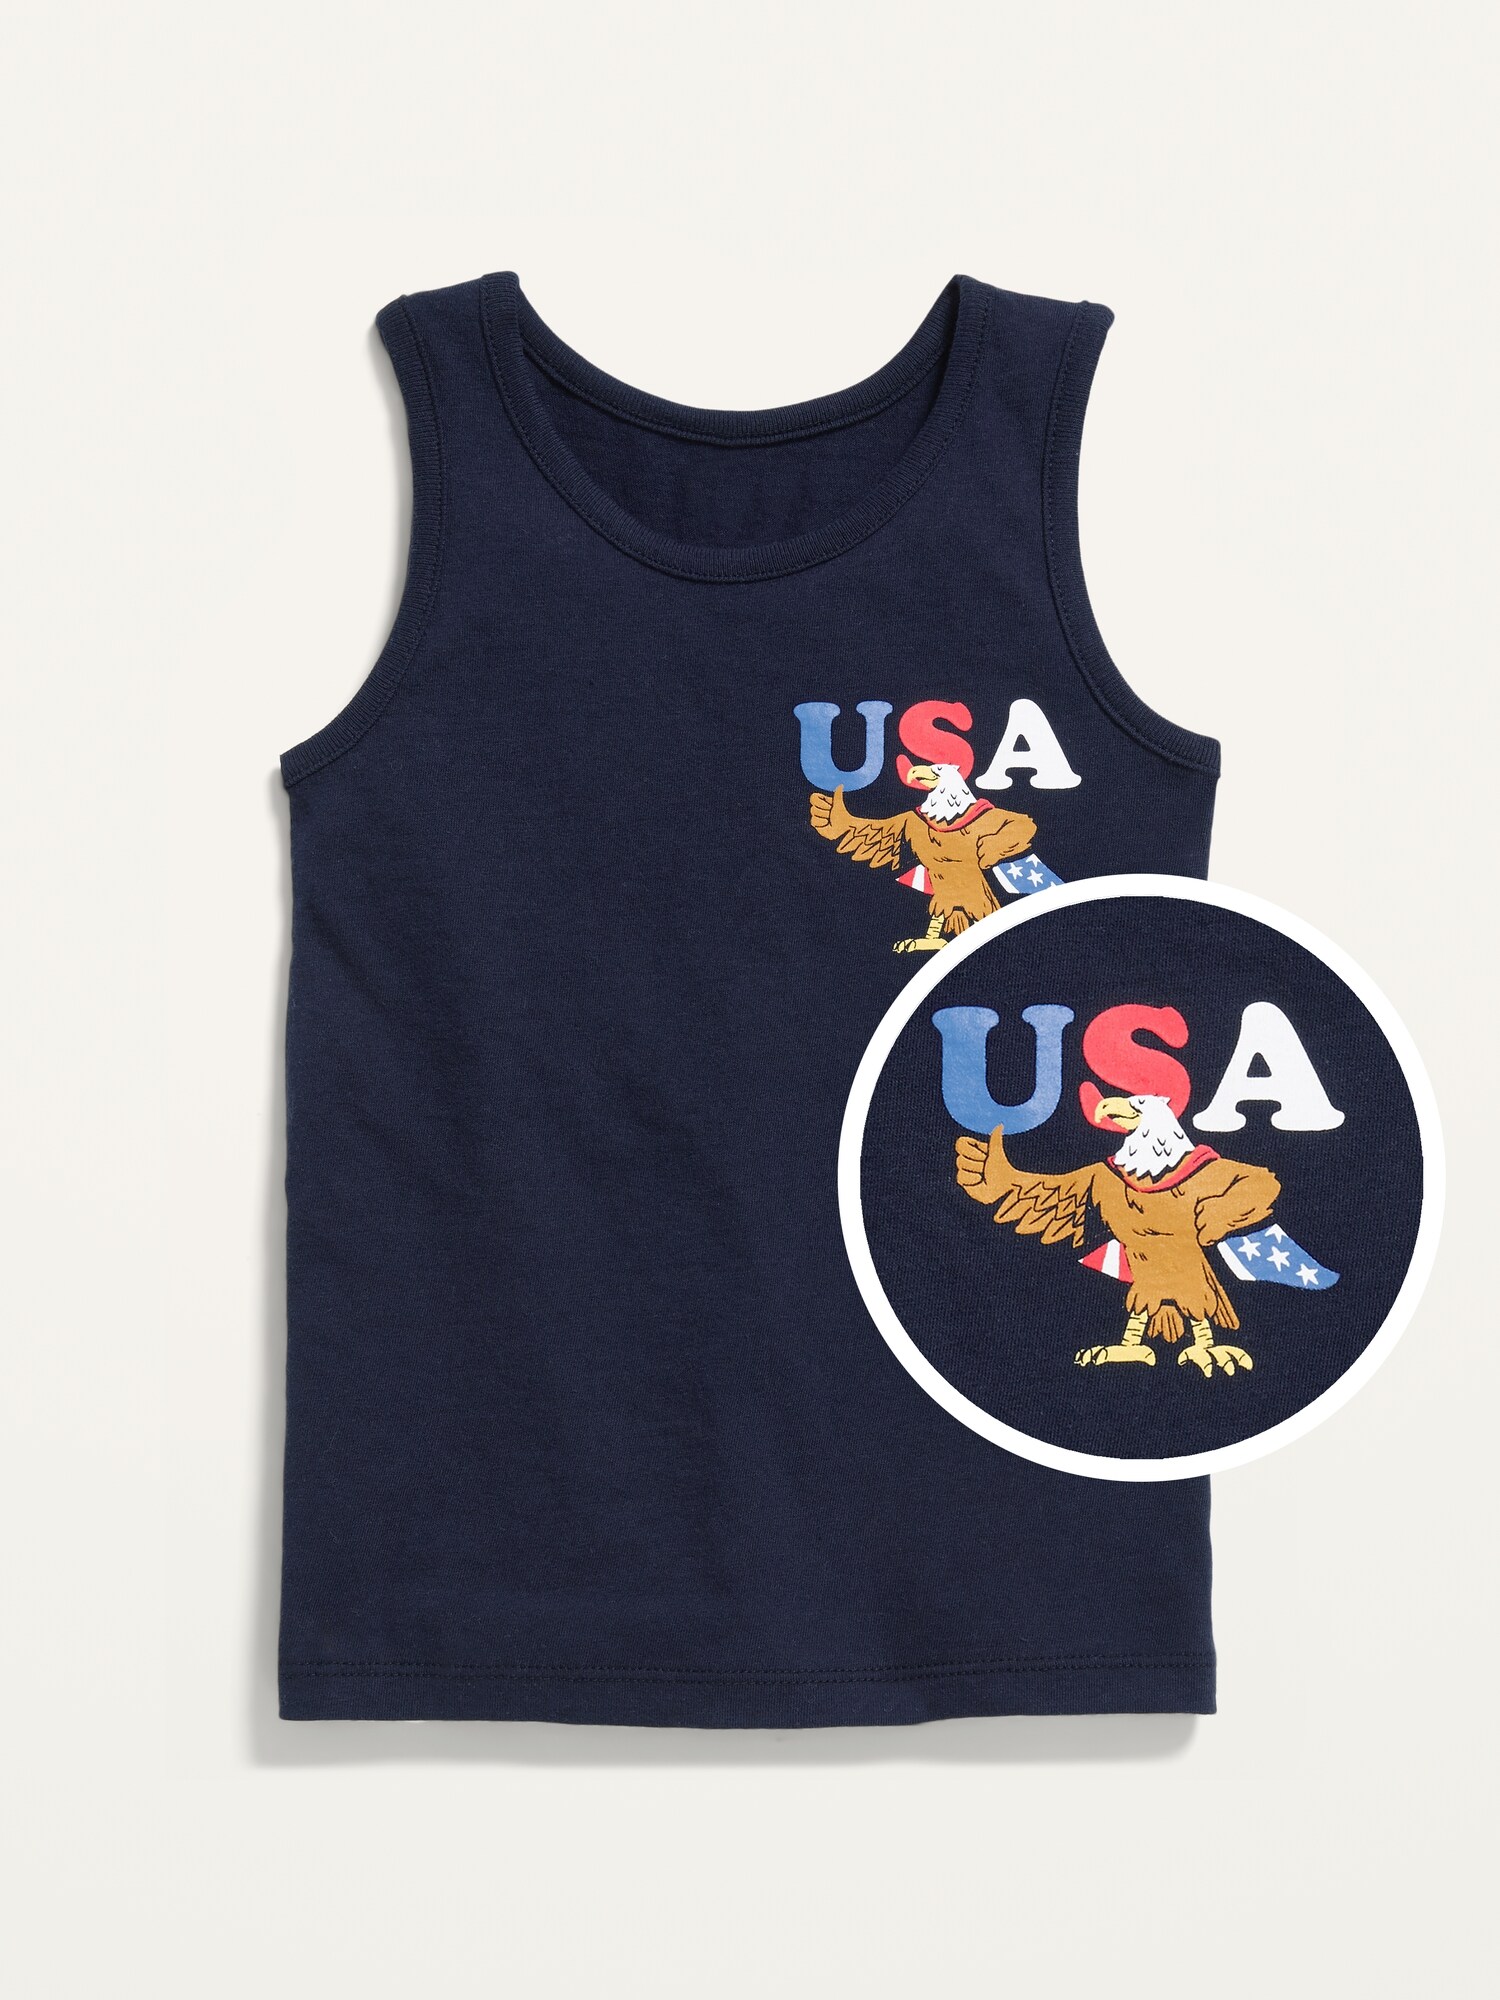 Unisex Soft-Washed Tank Top for Toddler